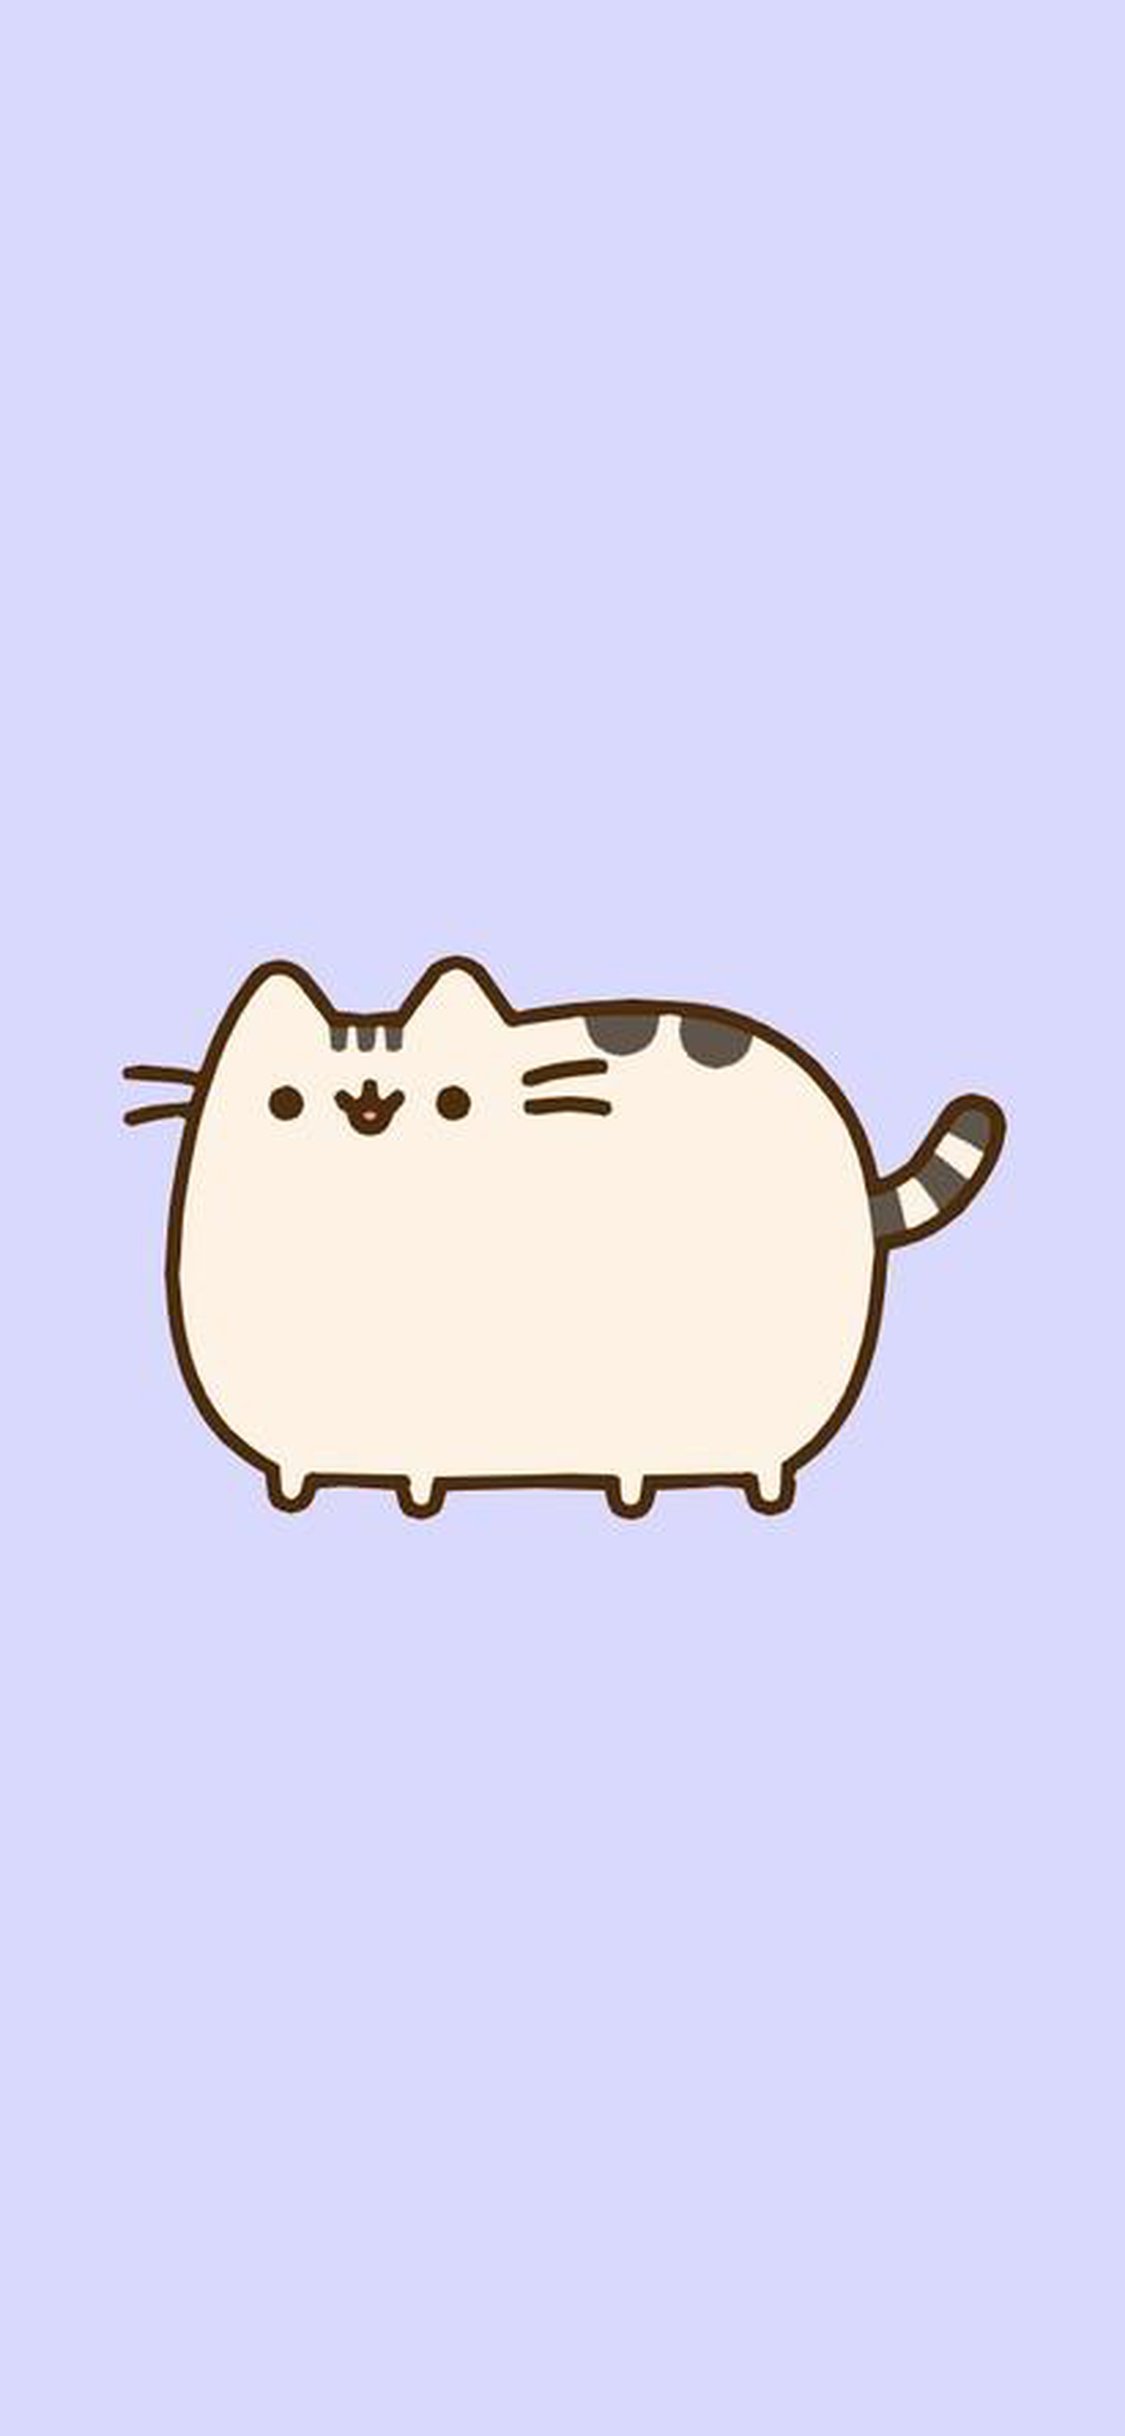 Download Funny Fat Pusheen Cat For Iphone X Wallpaper - Coloring Pages Pusheen Cats , HD Wallpaper & Backgrounds